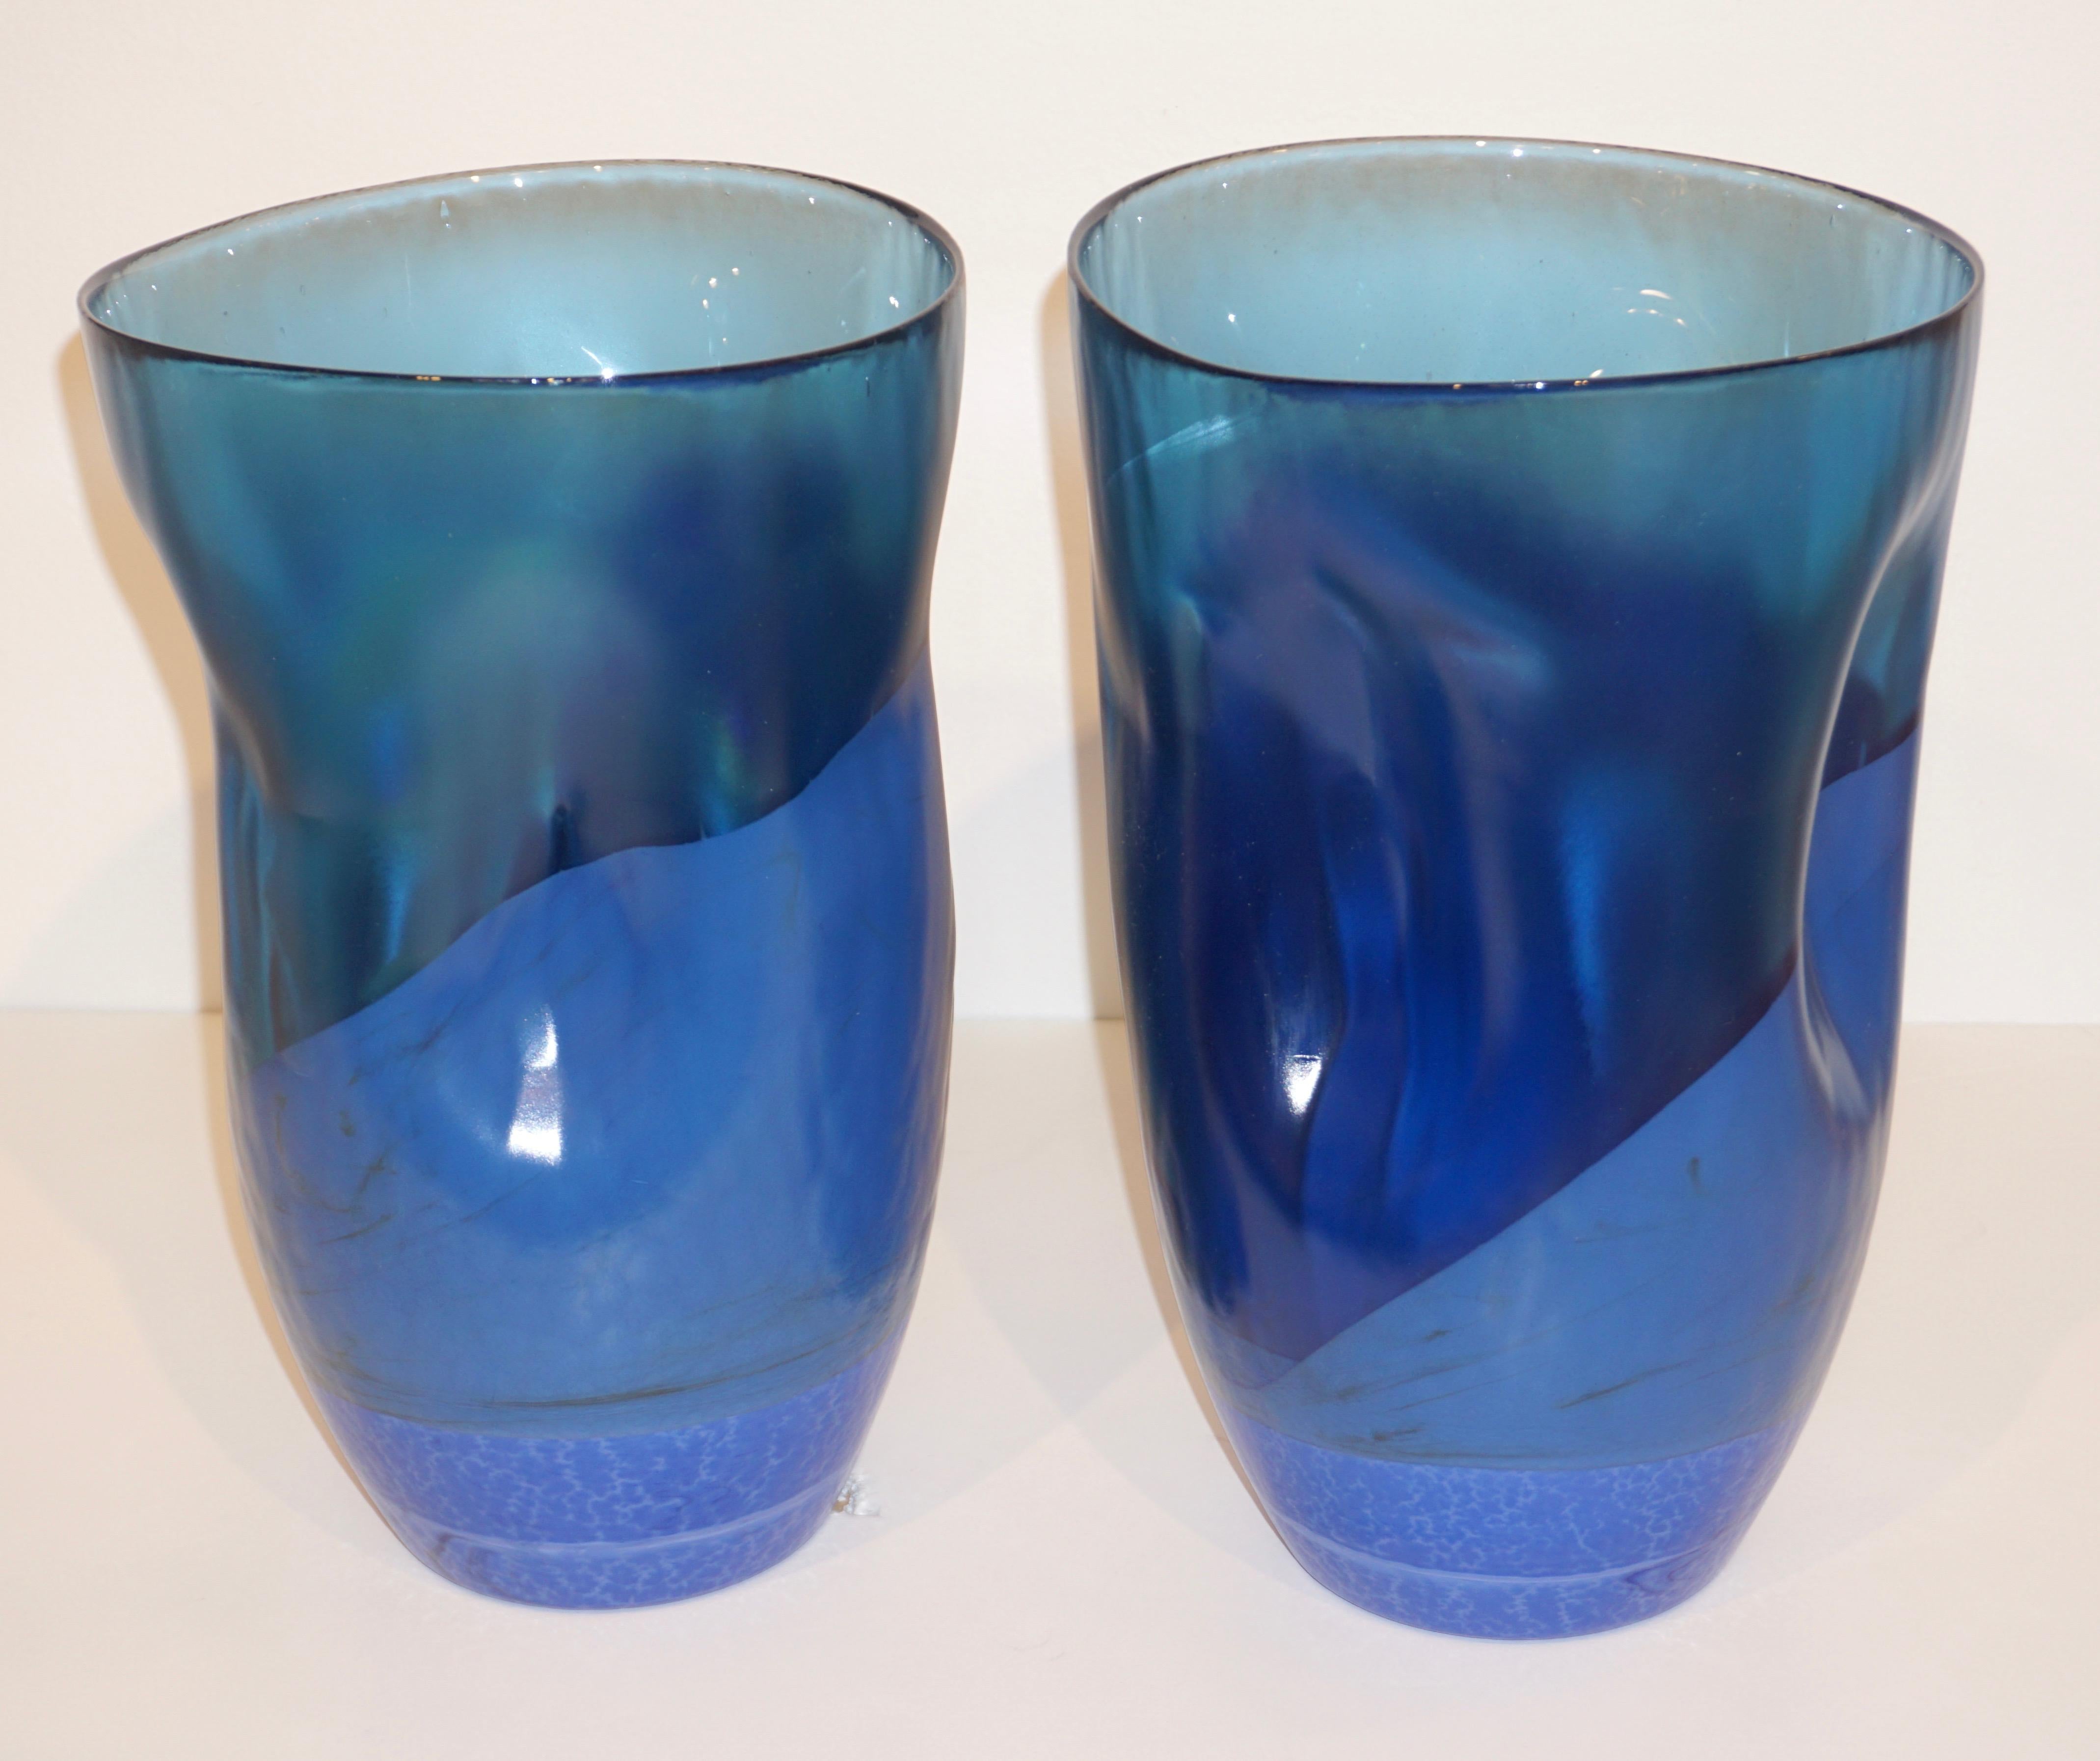 Decorative Italian pair of modernist cobalt aqua blue Murano glass vases of freeform with attractive interesting crumpled shape, the Venetian blown glass has a pâte de Verre consistency with an iridescent finish that gives a glowing movement.
Can